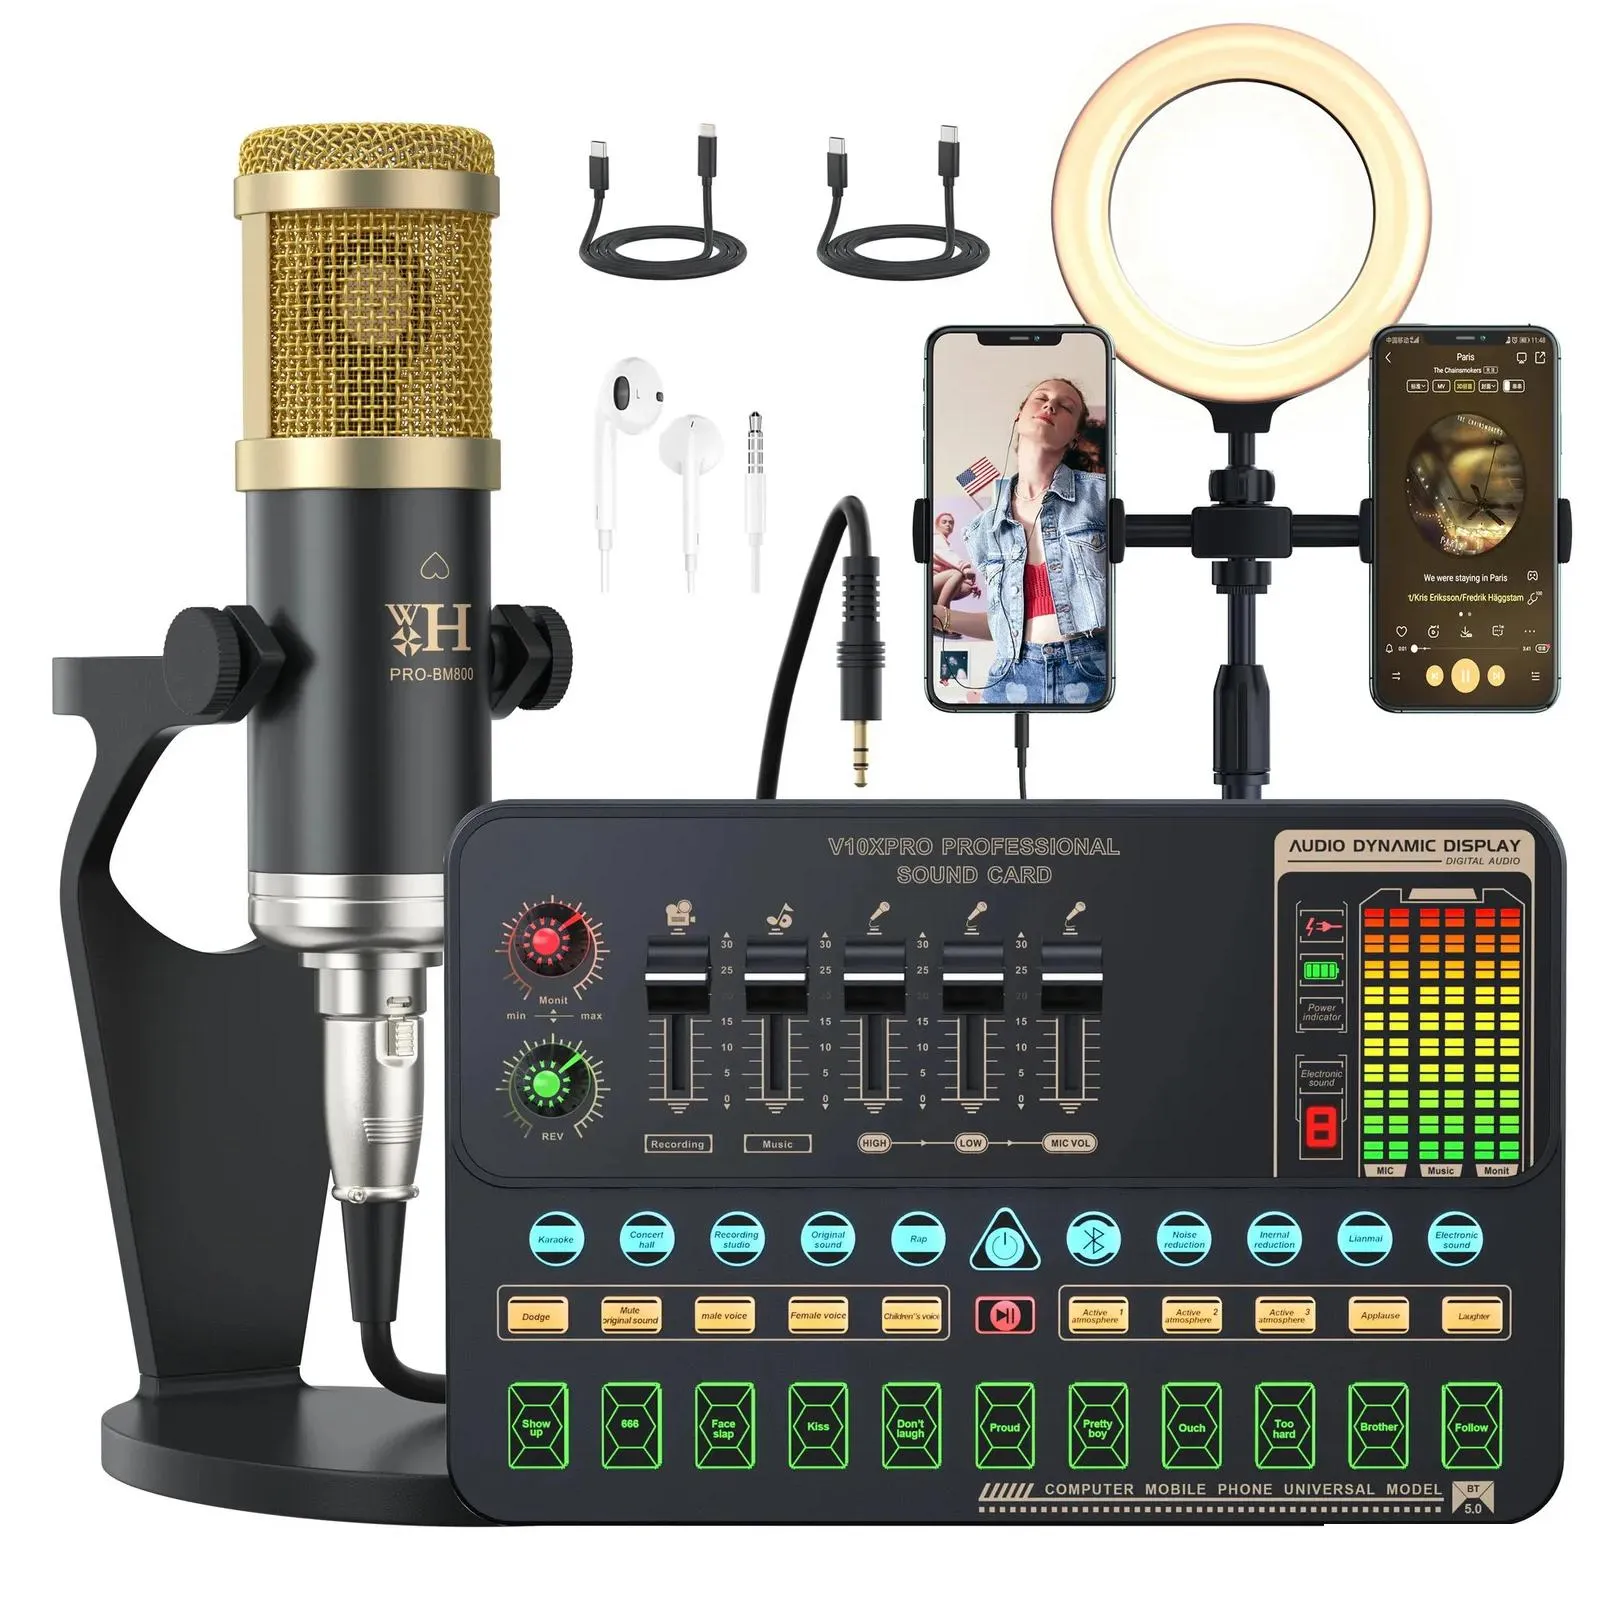 microphones upgrade professional audio v10xpro sound card set pro bm800 mic studio condenser microphone for live streaming 231117